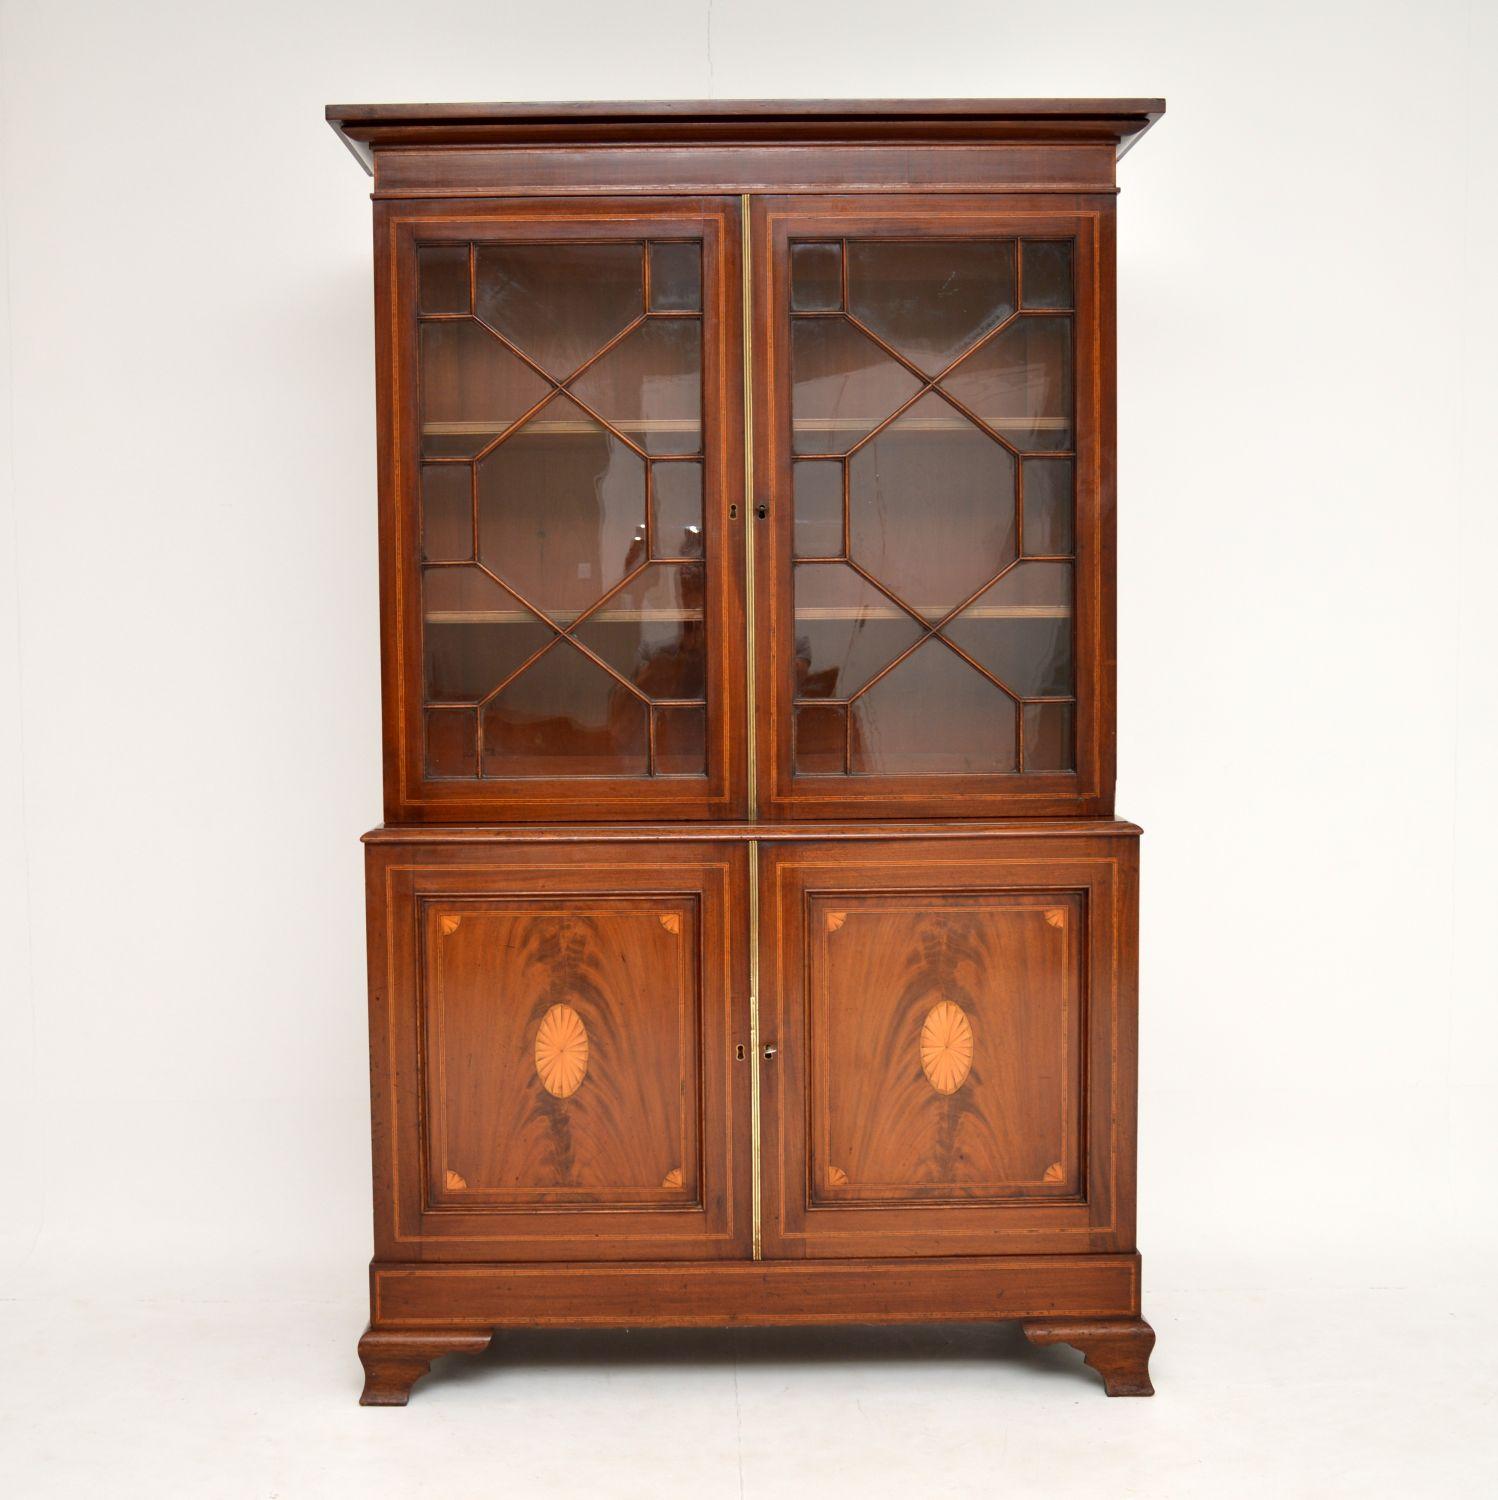 Very smart antique Edwardian Sheraton style mahogany bookcase dating from the 1890-1900 period and in excellent original condition.

It’s made in two sections, with the astral-glazed upper part having adjustable bookshelves on sharks tooth